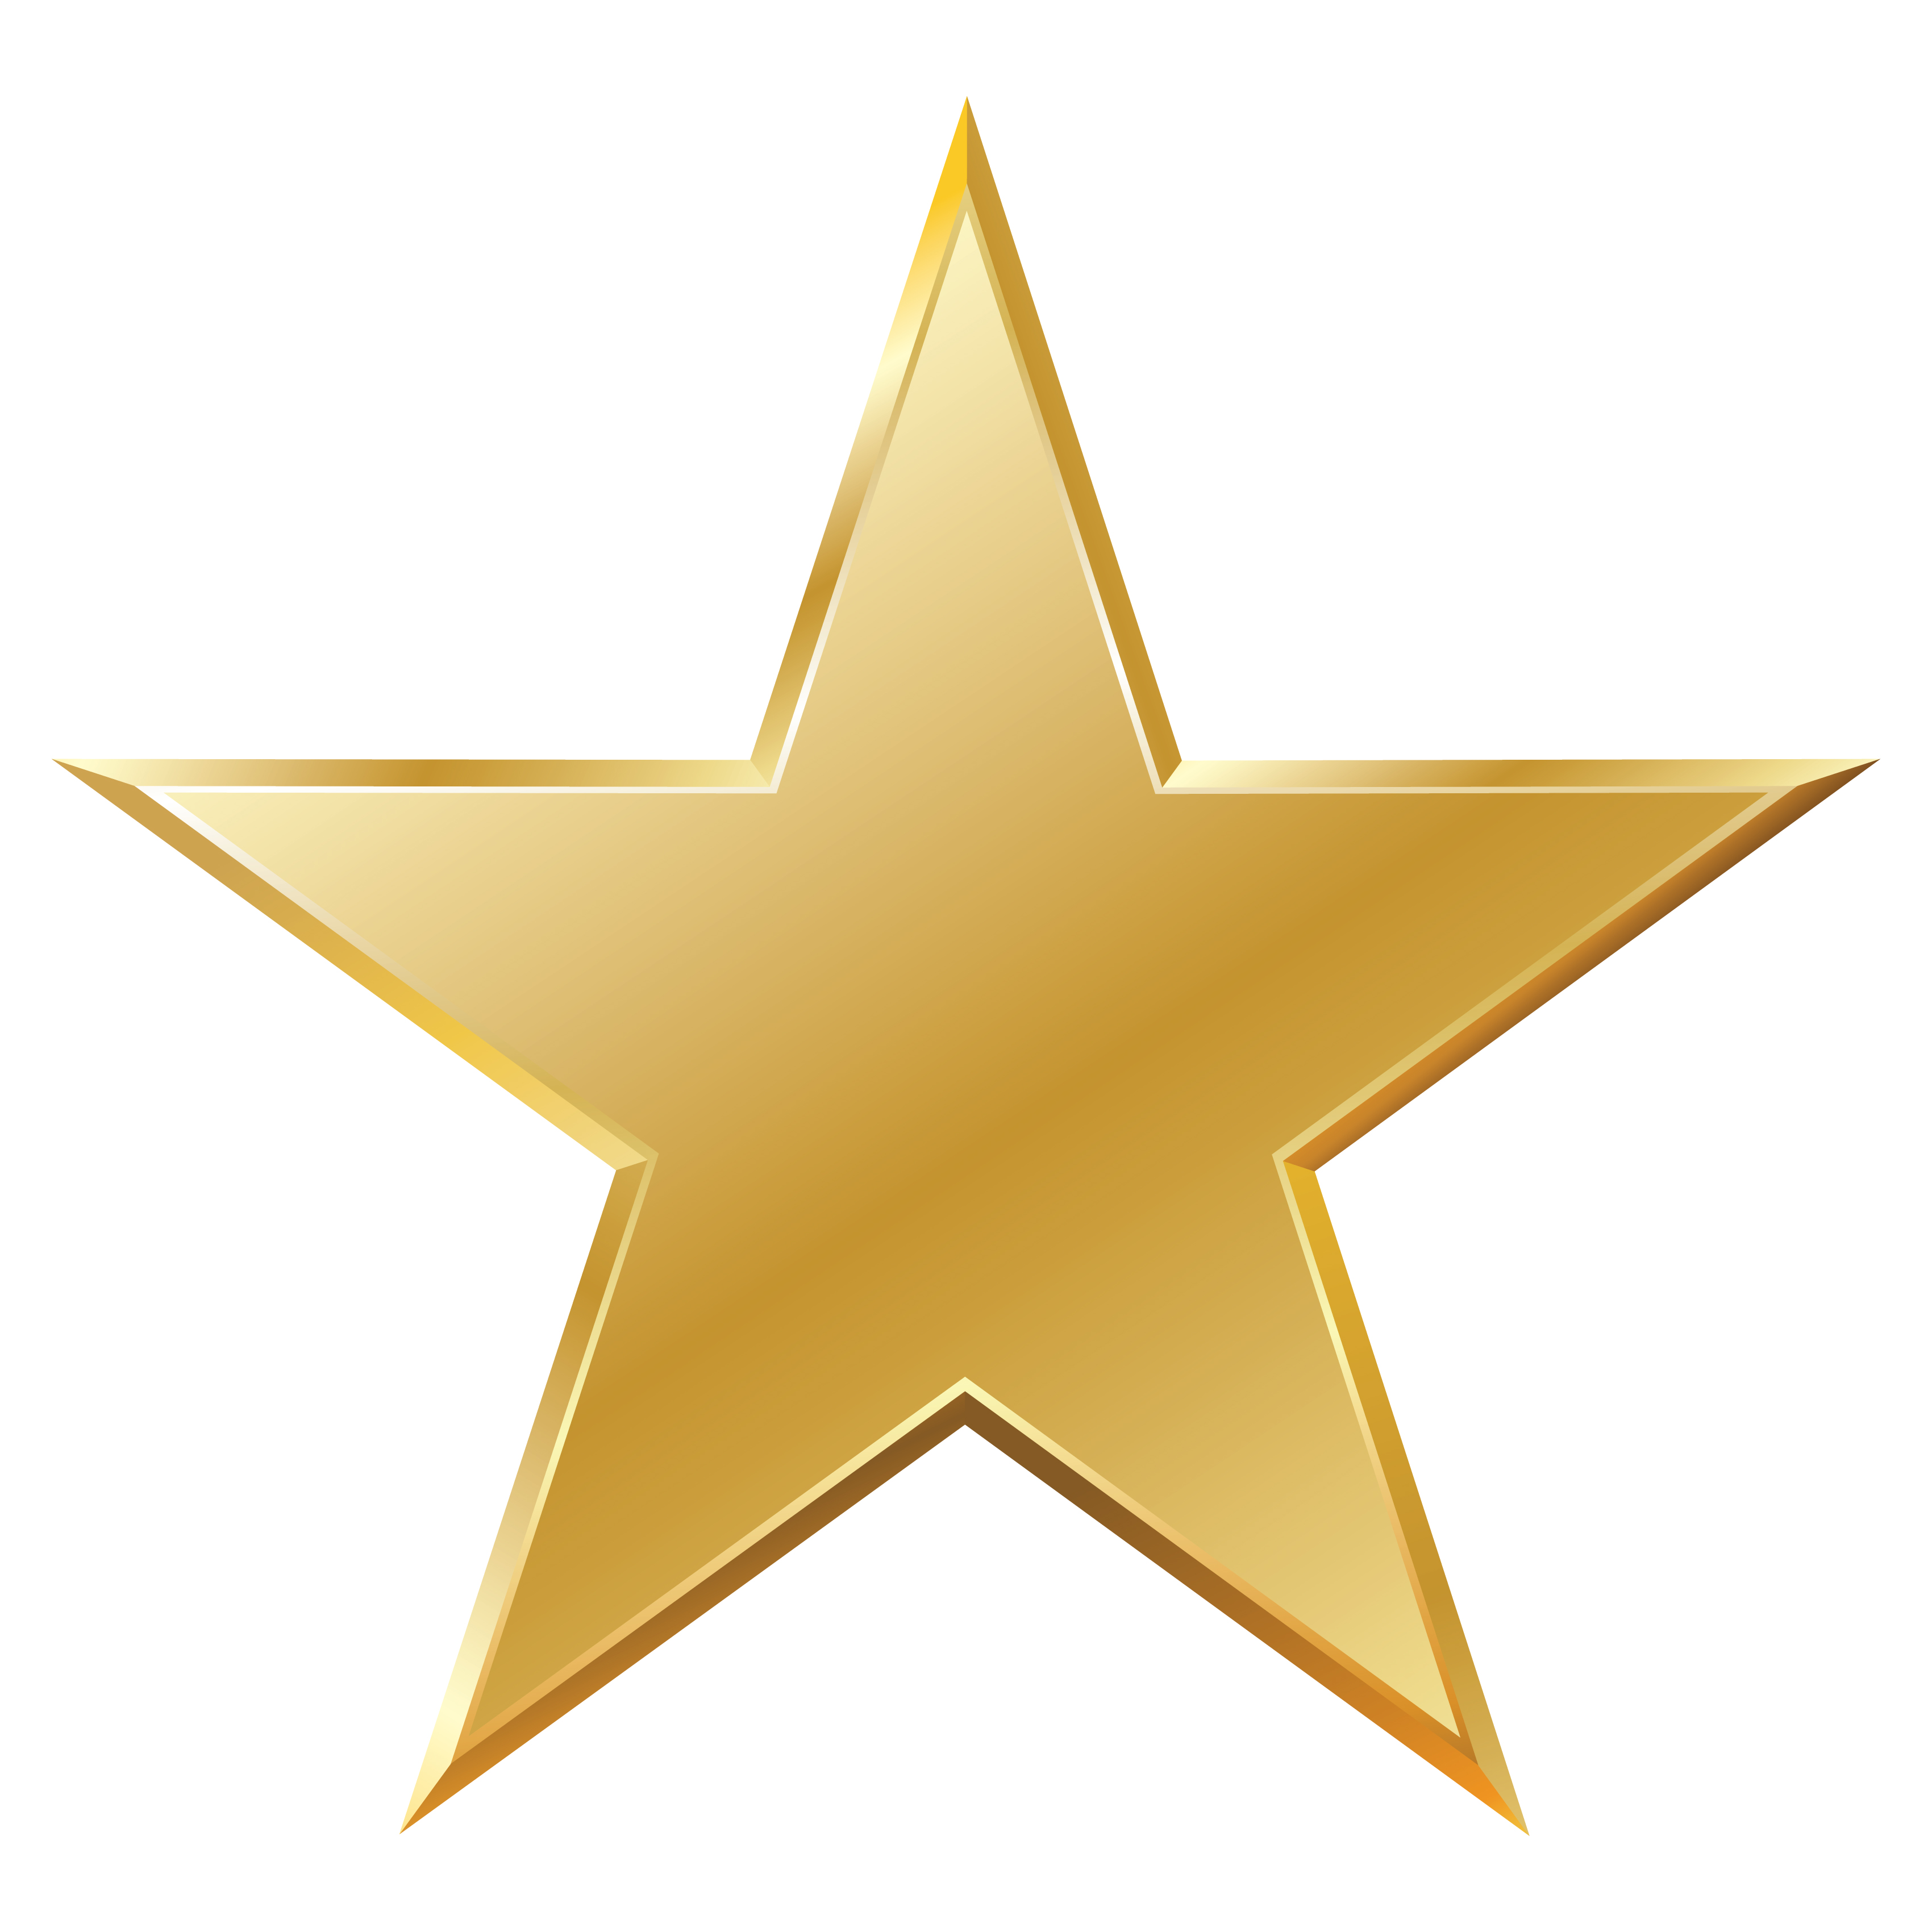 18 Photos of Gold Star Clip Art And Graphics